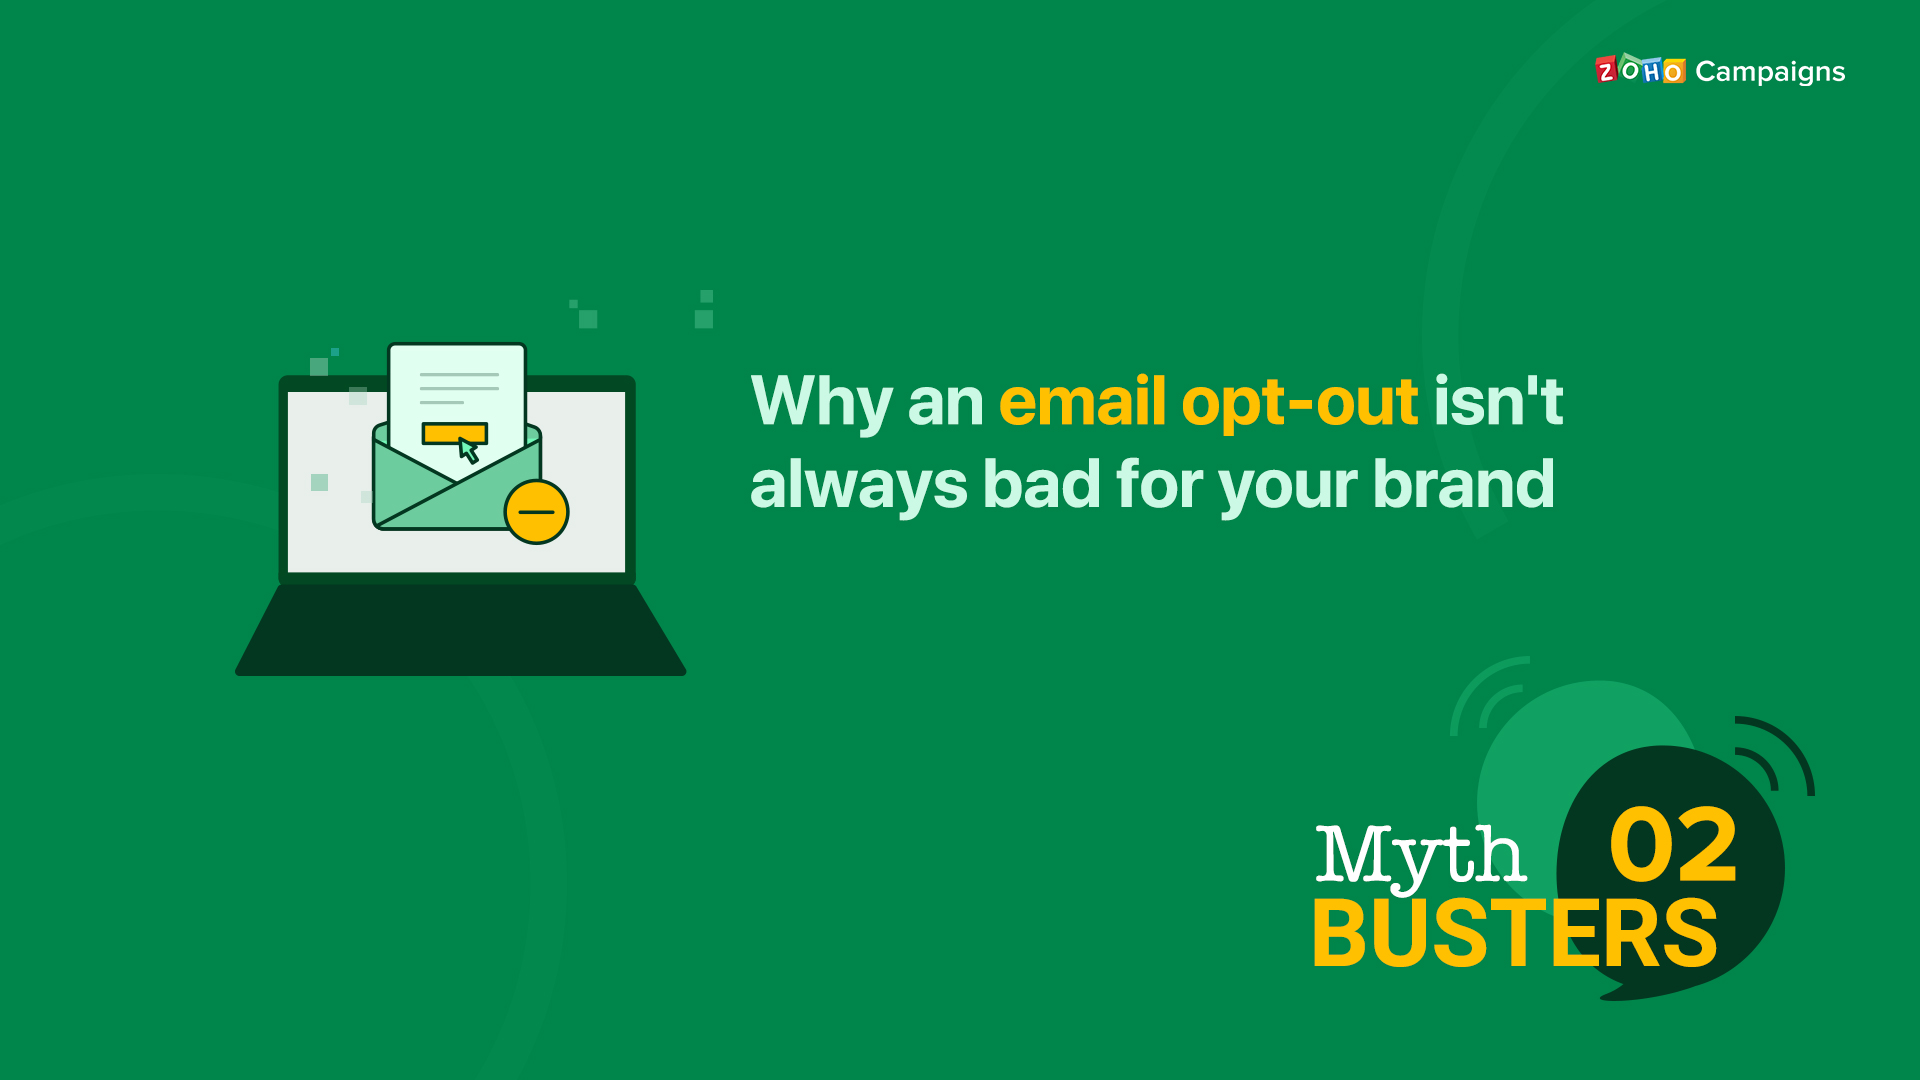 Why an email opt-out isn't always bad for your brand